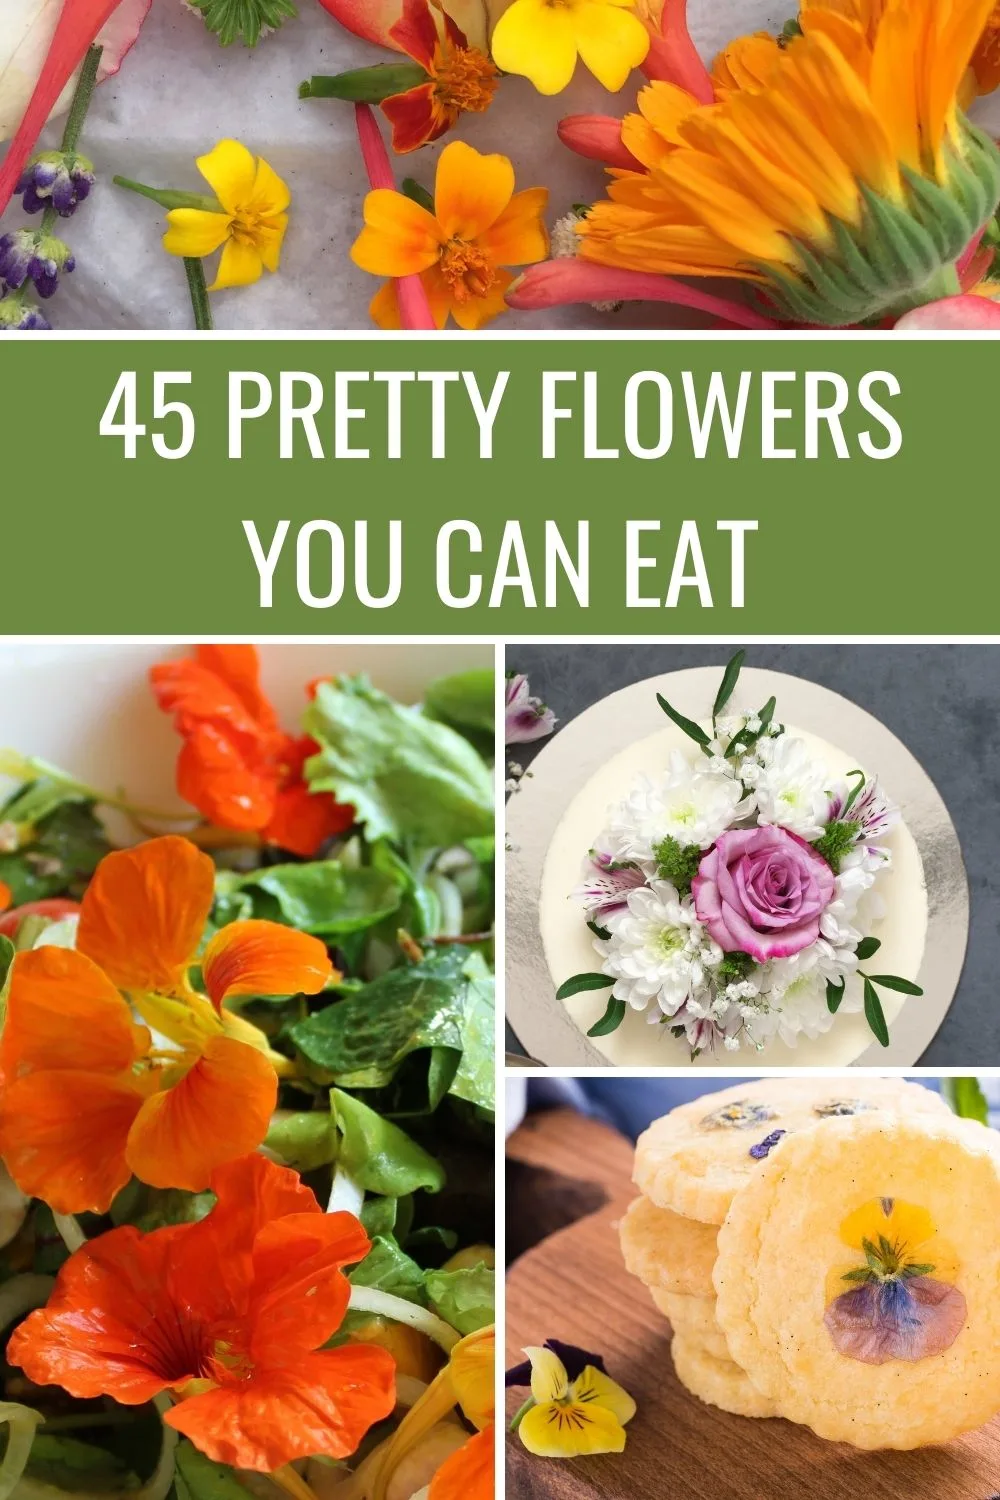 45 pretty flowers you can eat